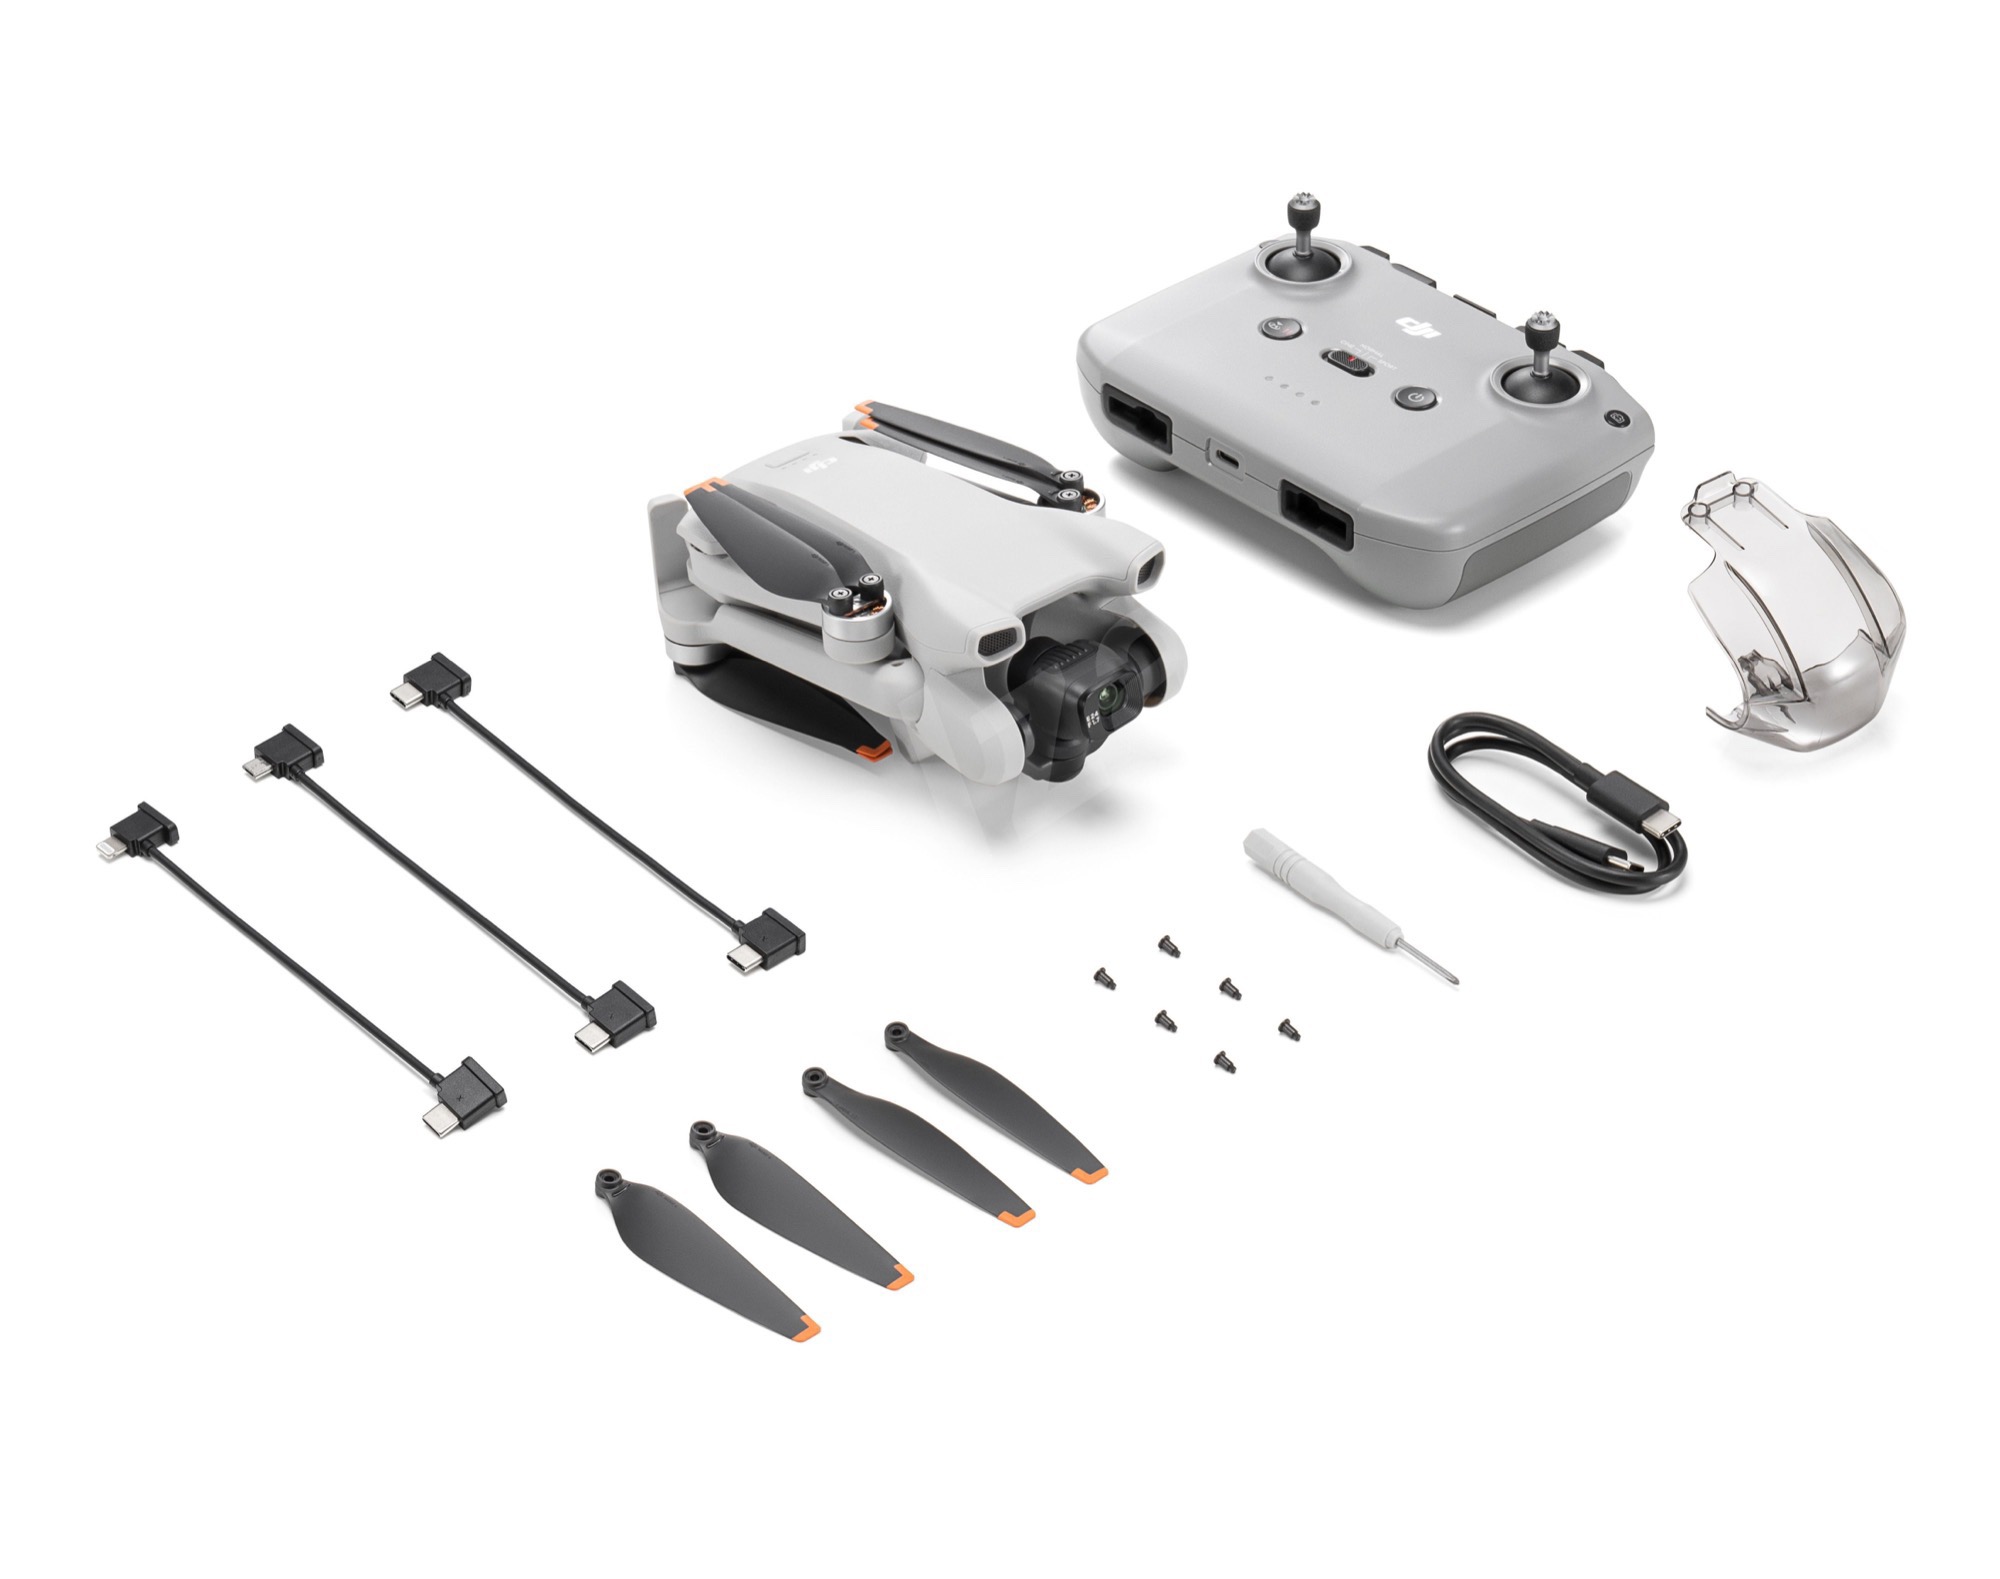 News remote controller bundle DJI - Retailer 3: RC-N1 and Mini with confirms European pricing NotebookCheck.net specifications